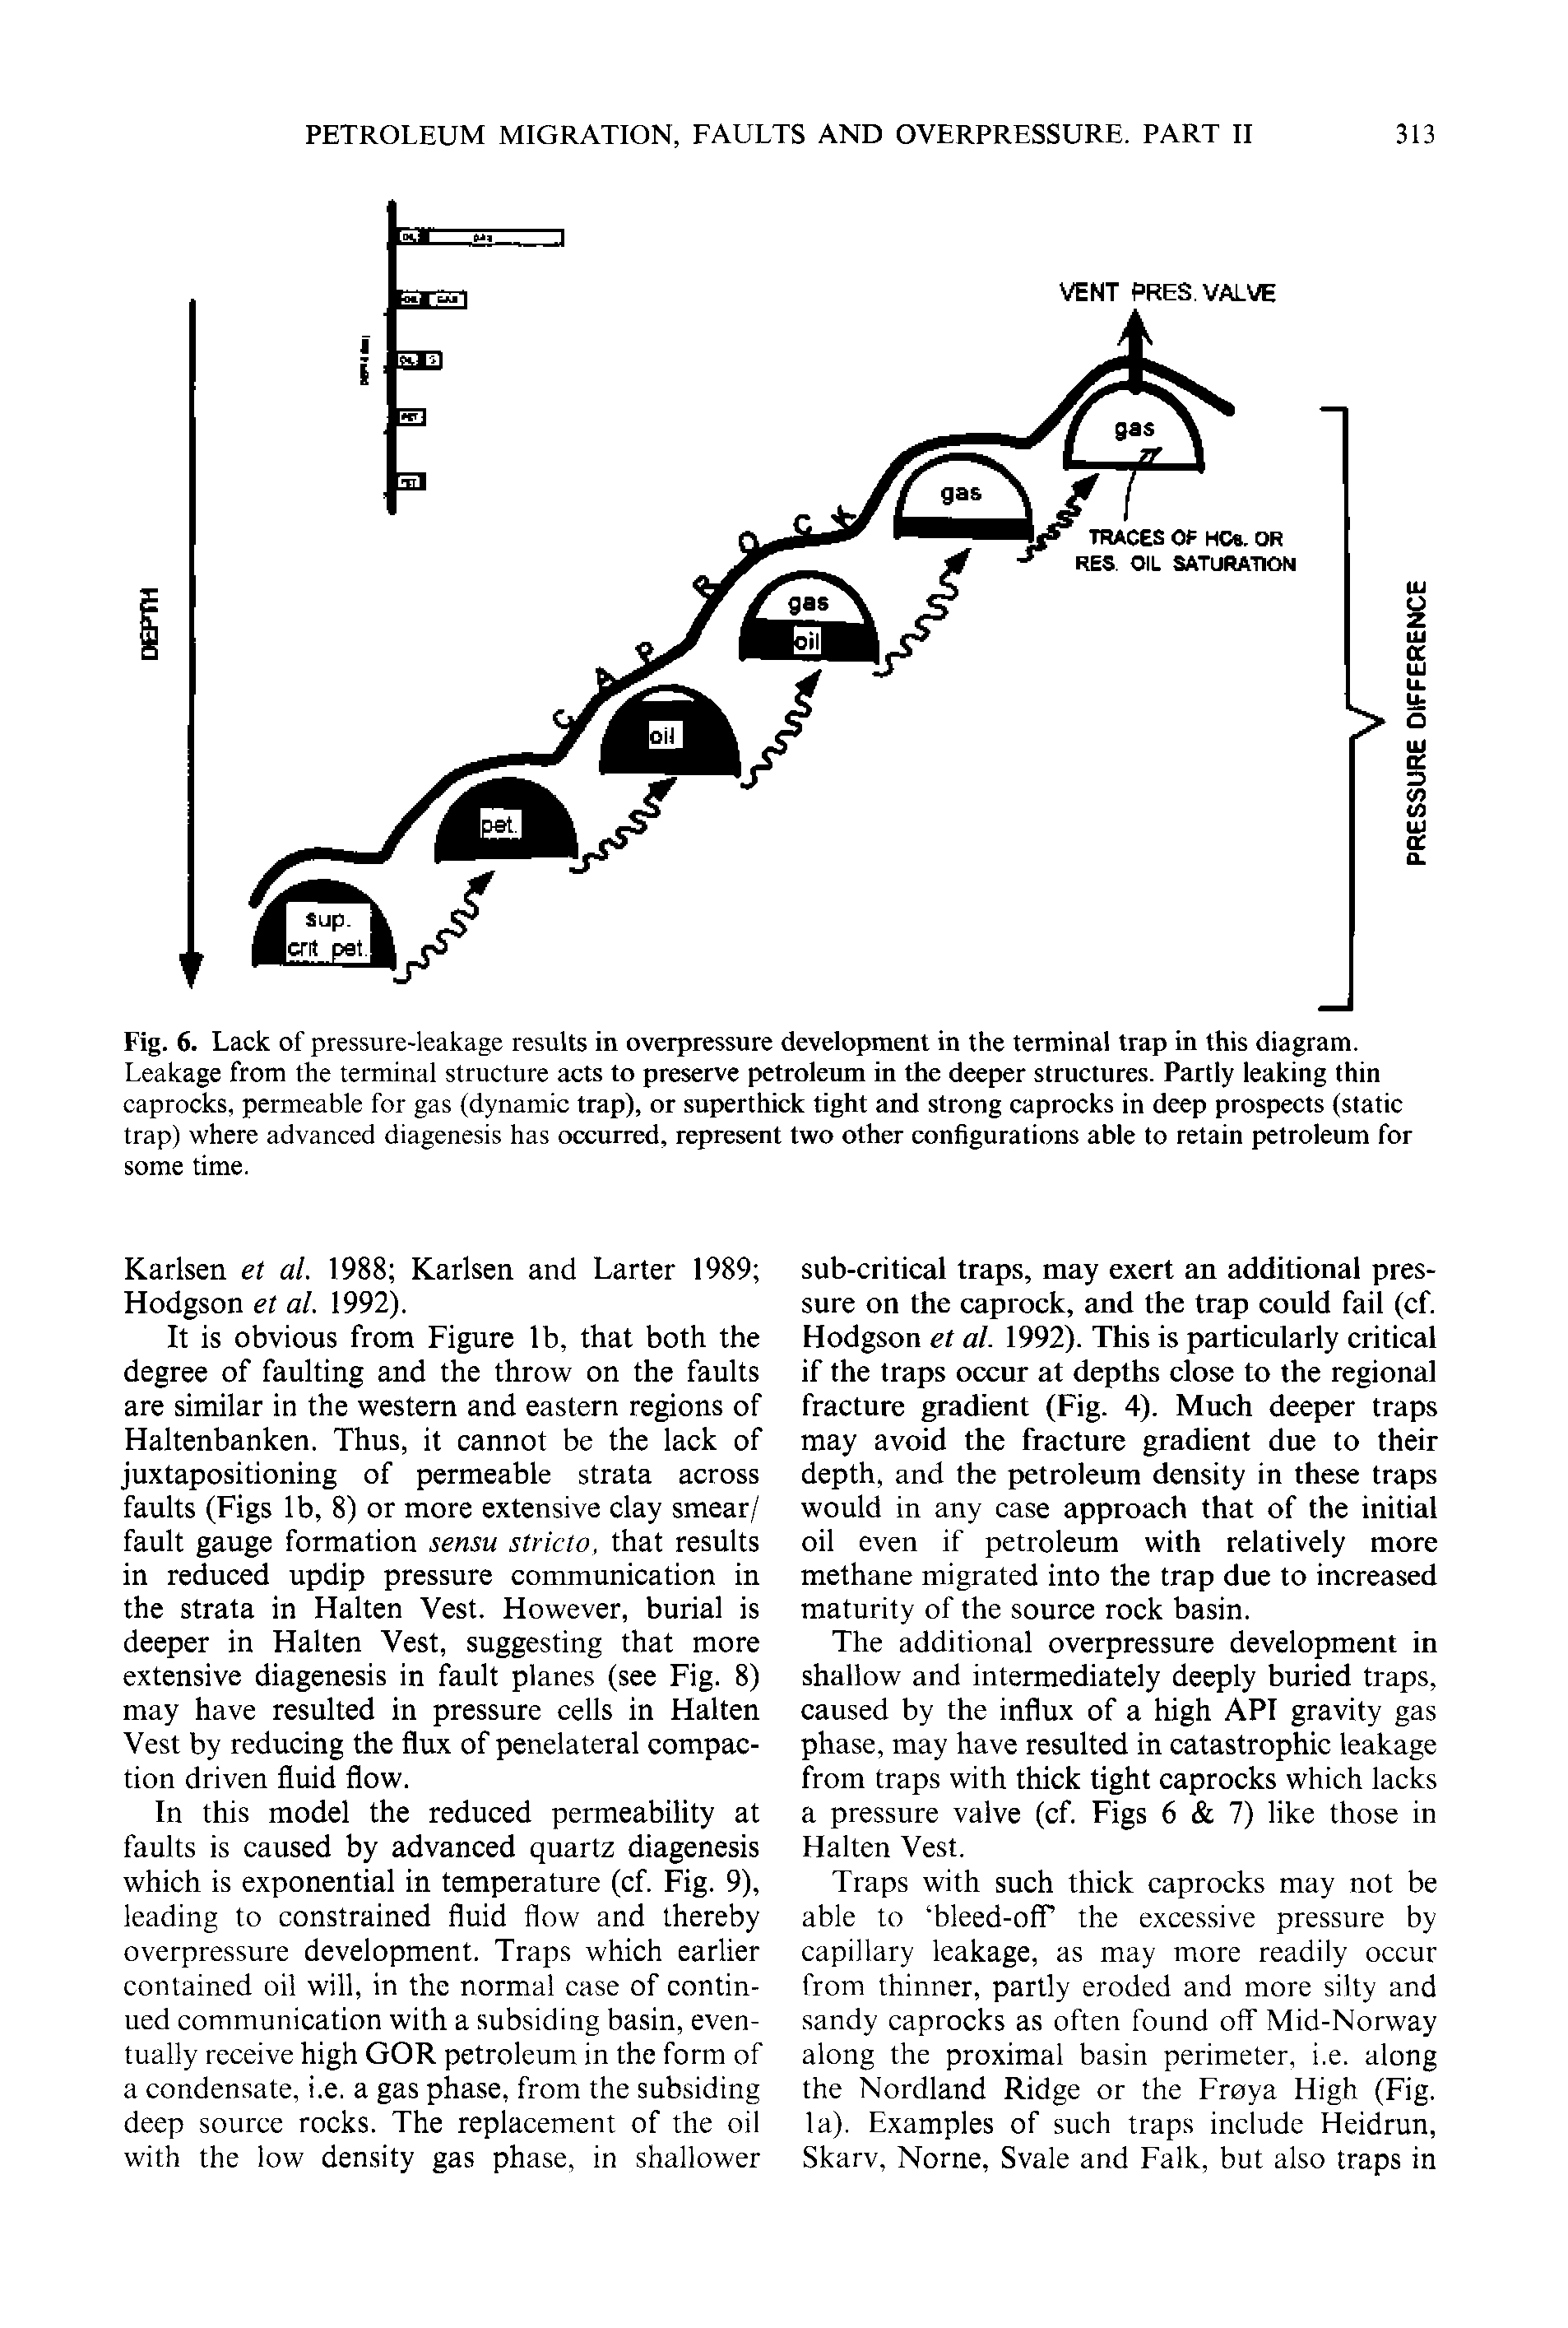 Fig. 6. Lack of pressure-leakage results in overpressure development in the terminal trap in this diagram. Leakage from the terminal structure acts to preserve petroleum in the deeper structures. Partly leaking thin caprocks, permeable for gas (dynamic trap), or superthick tight and strong caprocks in deep prospects (static trap) where advanced diagenesis has occurred, represent two other configurations able to retain petroleum for...